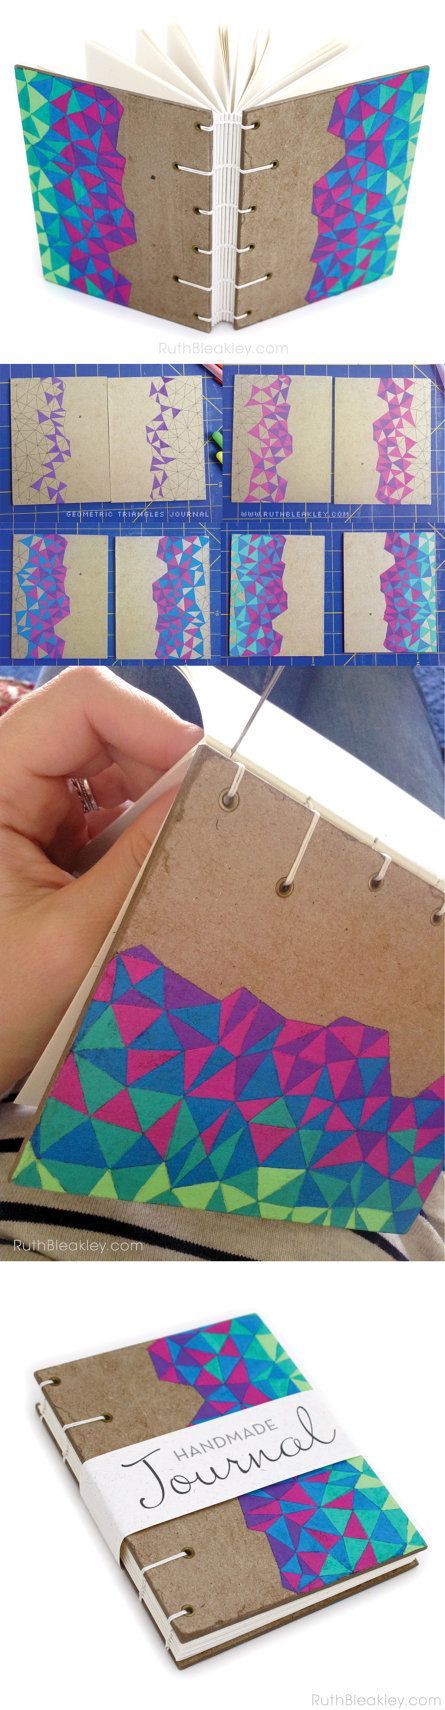 Coptic Stitch Journal with hand-drawn geometric triangles by Ruth Bleakley on Etsy